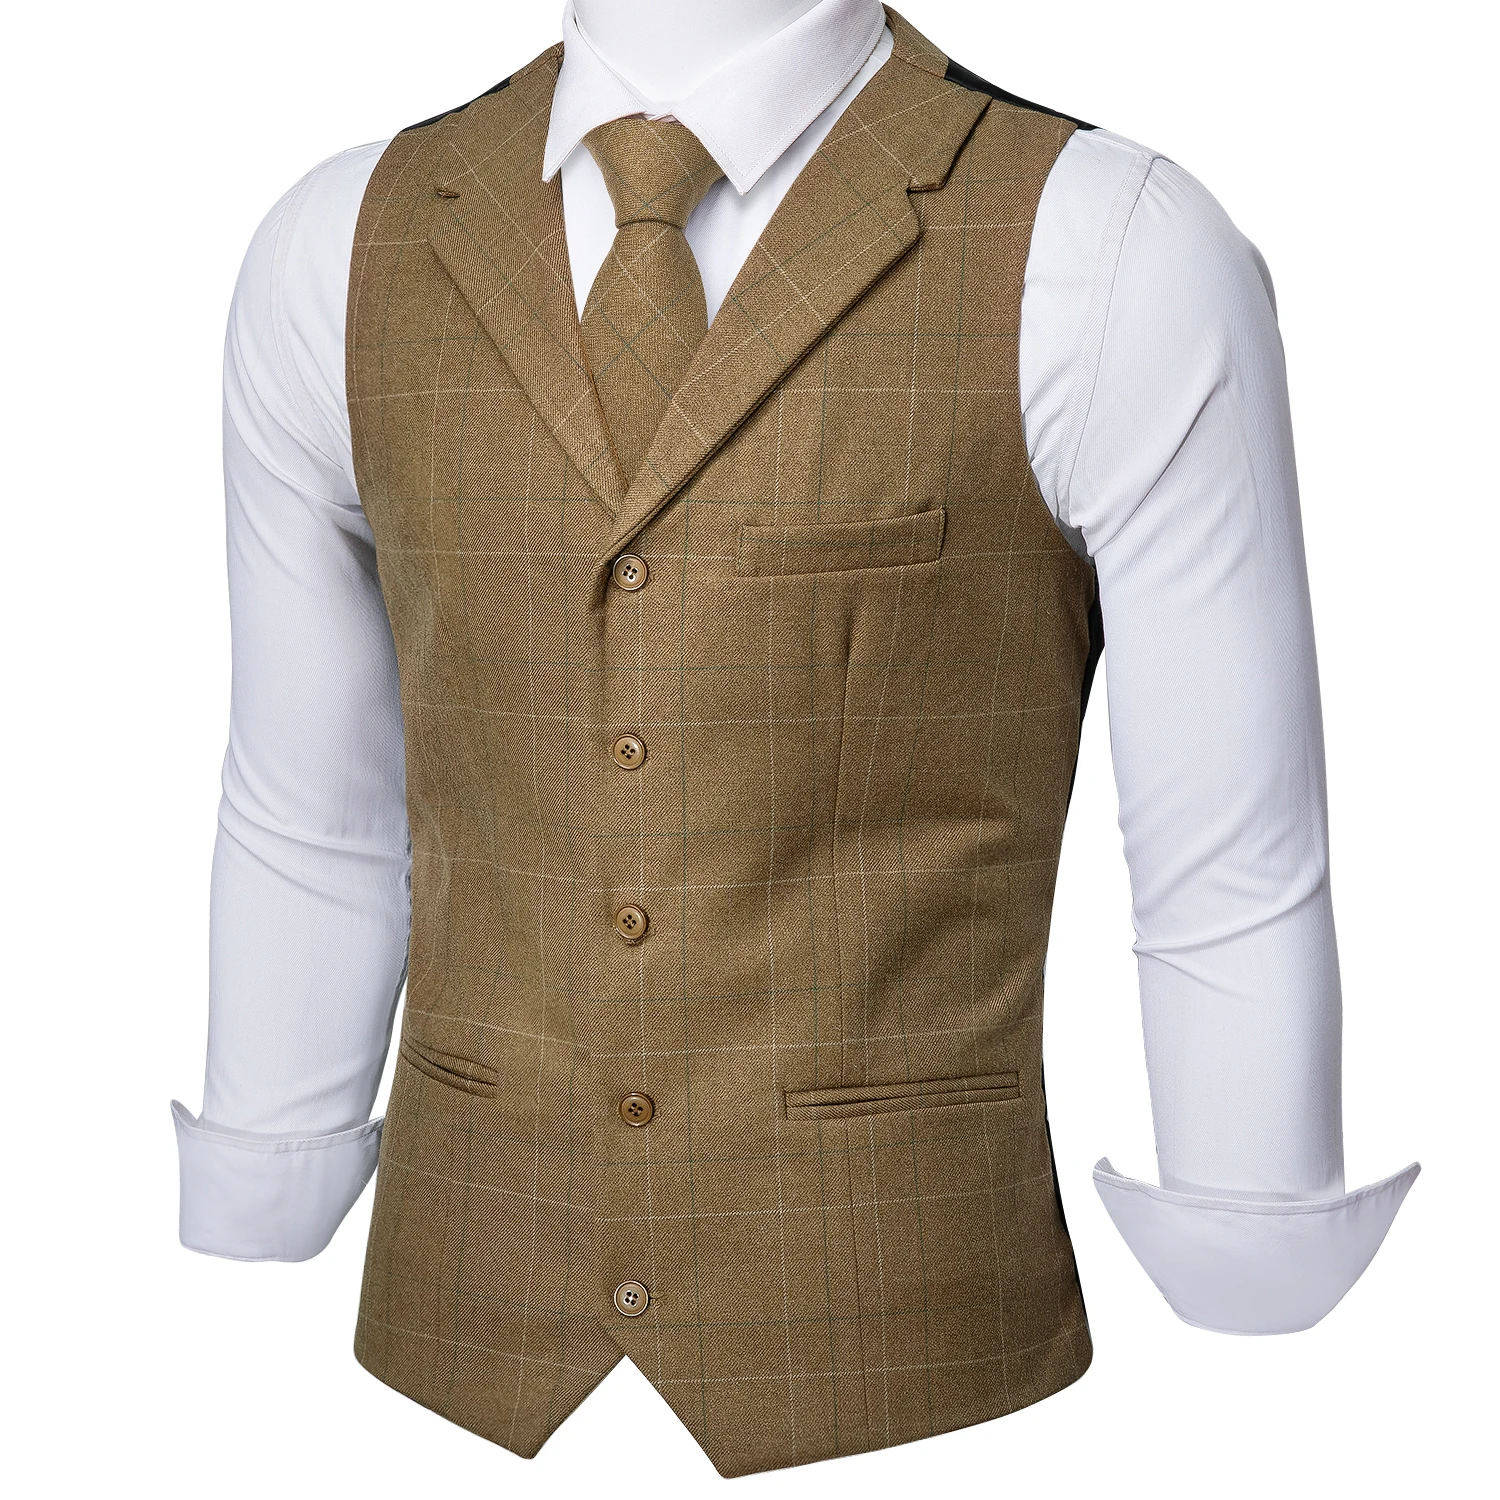 

Barry.Wang Mens Olive Yellow Plaid Waistcoat Blend Tailored Collar V-neck 3 Pocket Check Vest Tie Set Formal Leisure MD-2204